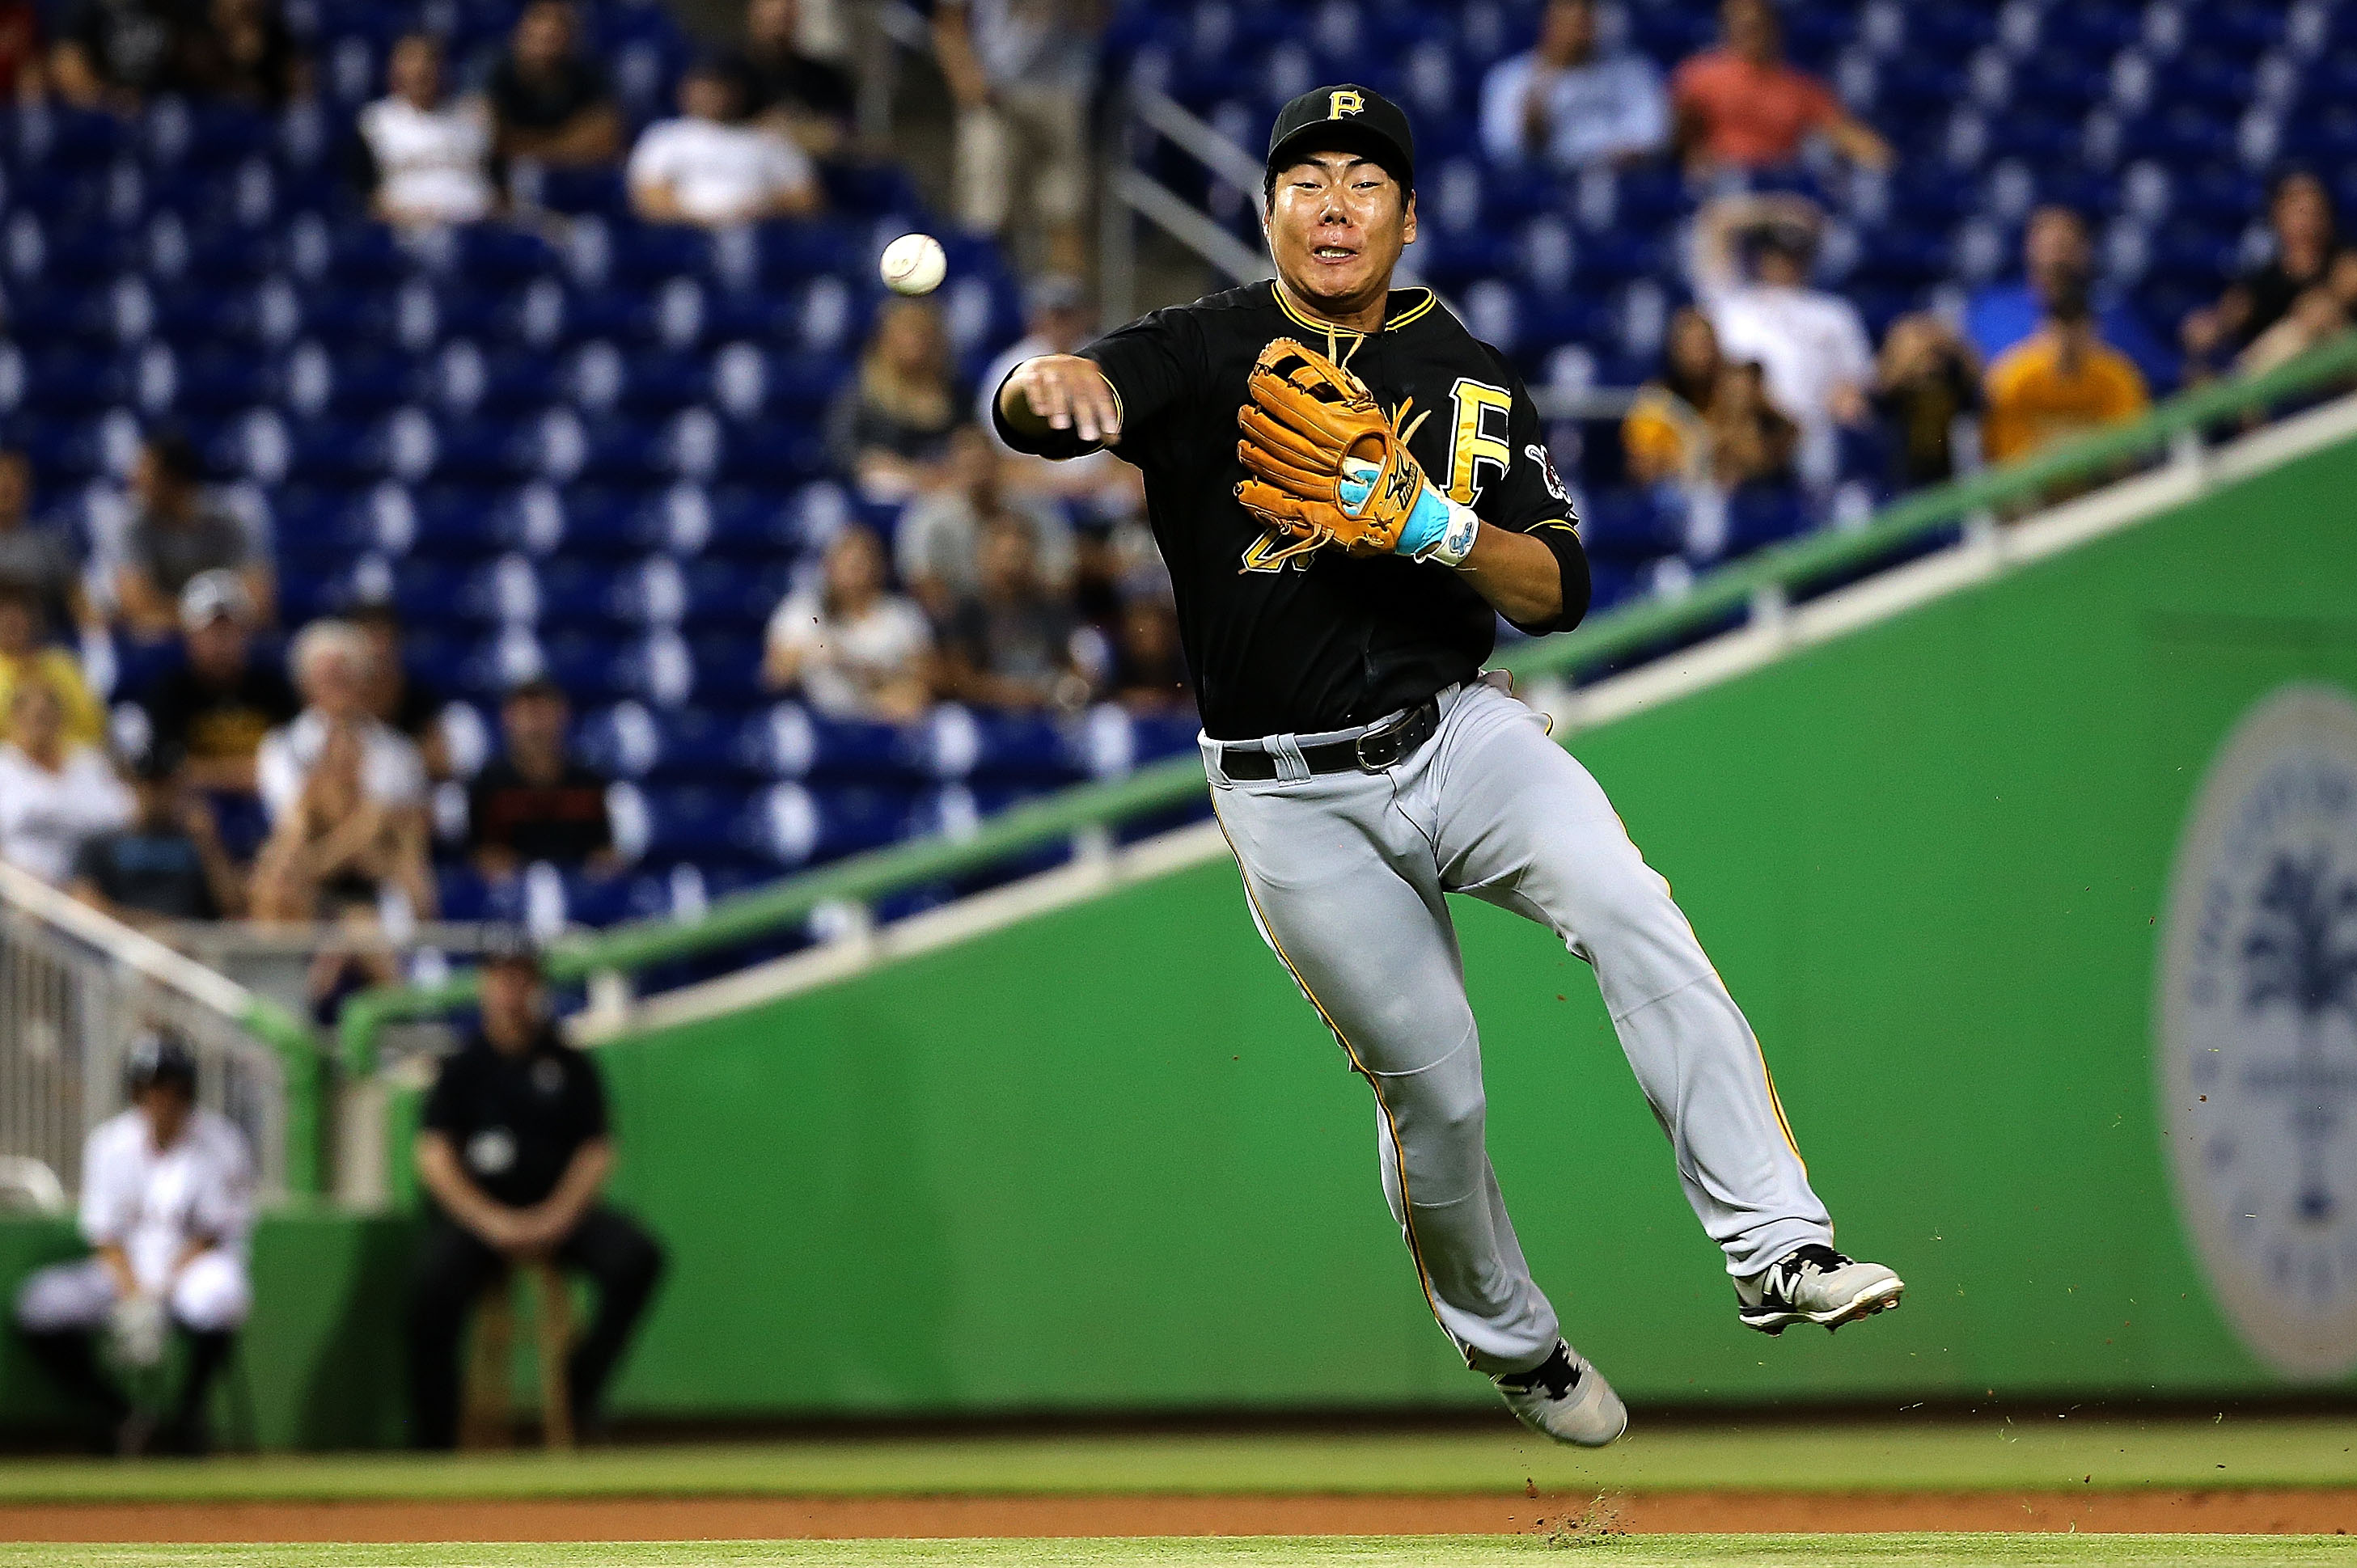 Ariball News - Jung-Ho Kang: Can He Succeed in the Majors?